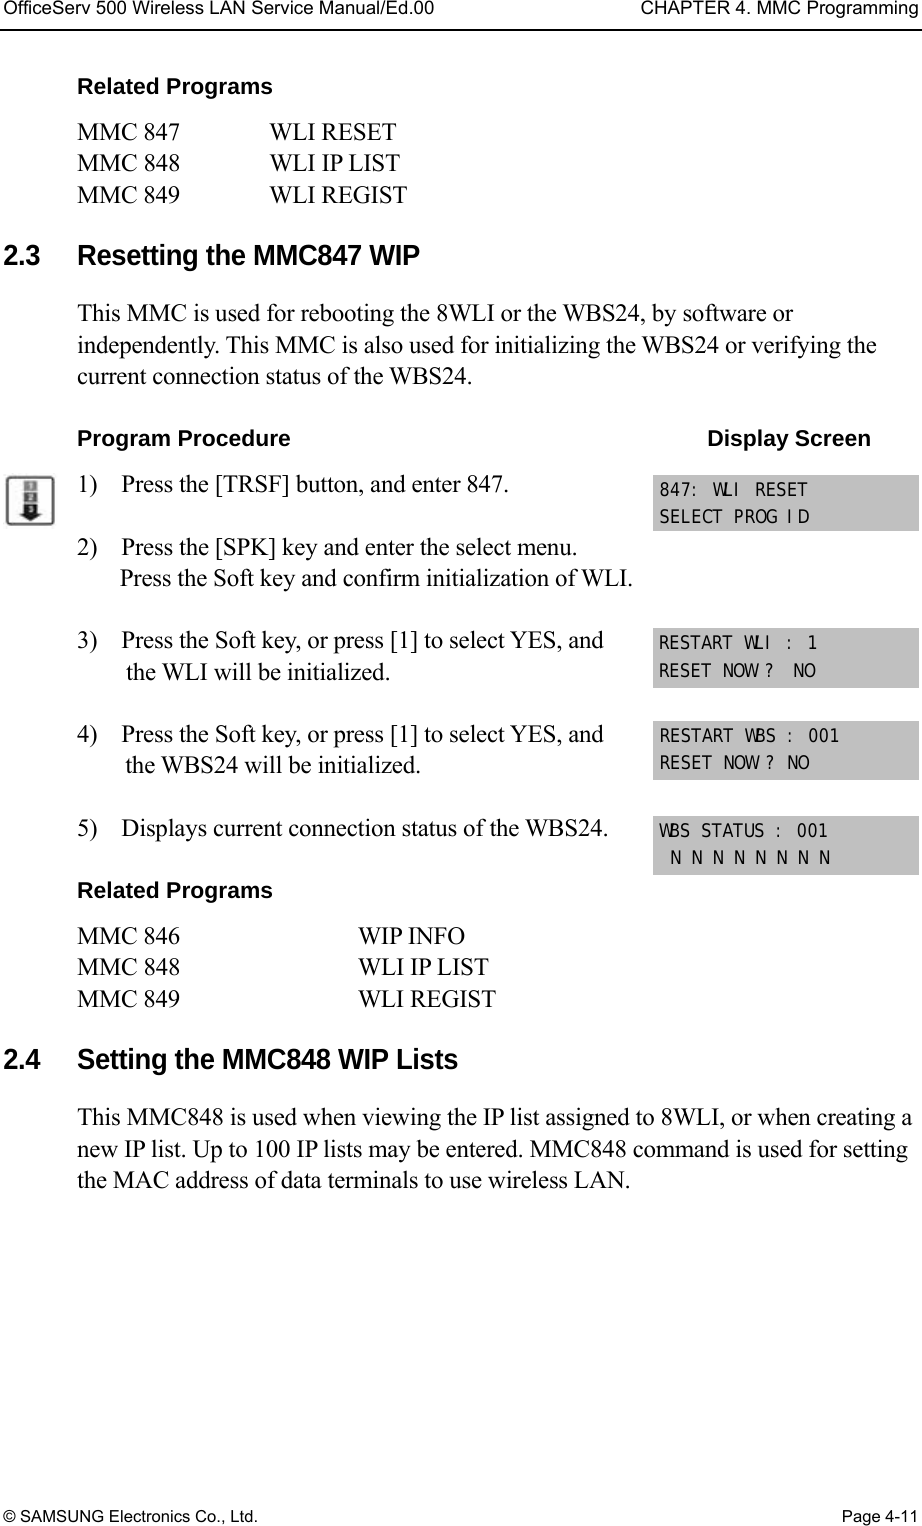 OfficeServ 500 Wireless LAN Service Manual/Ed.00  CHAPTER 4. MMC Programming © SAMSUNG Electronics Co., Ltd.  Page 4-11 Related Programs MMC 847   WLI RESET MMC 848   WLI IP LIST MMC 849   WLI REGIST  2.3  Resetting the MMC847 WIP This MMC is used for rebooting the 8WLI or the WBS24, by software or independently. This MMC is also used for initializing the WBS24 or verifying the current connection status of the WBS24.  Program Procedure                                     Display Screen 1)    Press the [TRSF] button, and enter 847.  2)    Press the [SPK] key and enter the select menu. Press the Soft key and confirm initialization of WLI.  3)    Press the Soft key, or press [1] to select YES, and the WLI will be initialized.  4)    Press the Soft key, or press [1] to select YES, and the WBS24 will be initialized.  5)    Displays current connection status of the WBS24.  Related Programs MMC 846         WIP INFO    MMC 848     WLI IP LIST MMC 849     WLI REGIST  2.4  Setting the MMC848 WIP Lists This MMC848 is used when viewing the IP list assigned to 8WLI, or when creating a new IP list. Up to 100 IP lists may be entered. MMC848 command is used for setting the MAC address of data terminals to use wireless LAN. 847: WLI RESET SELECT PROG ID RESTART WLI : 1 RESET NOW ?  NO RESTART WBS : 001 RESET NOW ? NO WBS STATUS : 001  N N N N N N N N 